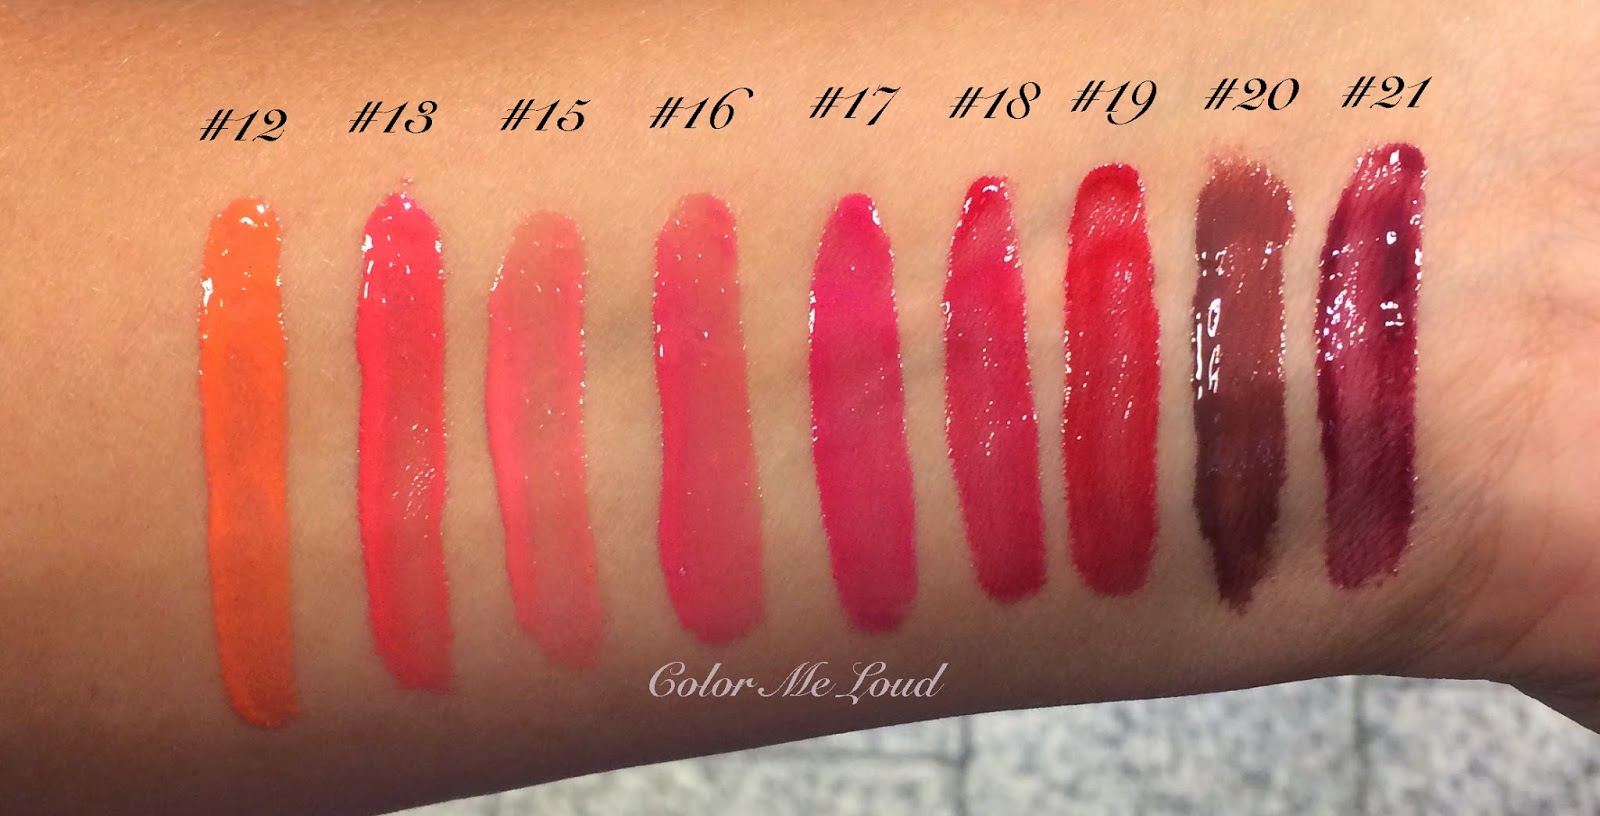 Review & Swatches: Chanel Rouge Coco Gloss in Caviar, Excitation, Aphrodite